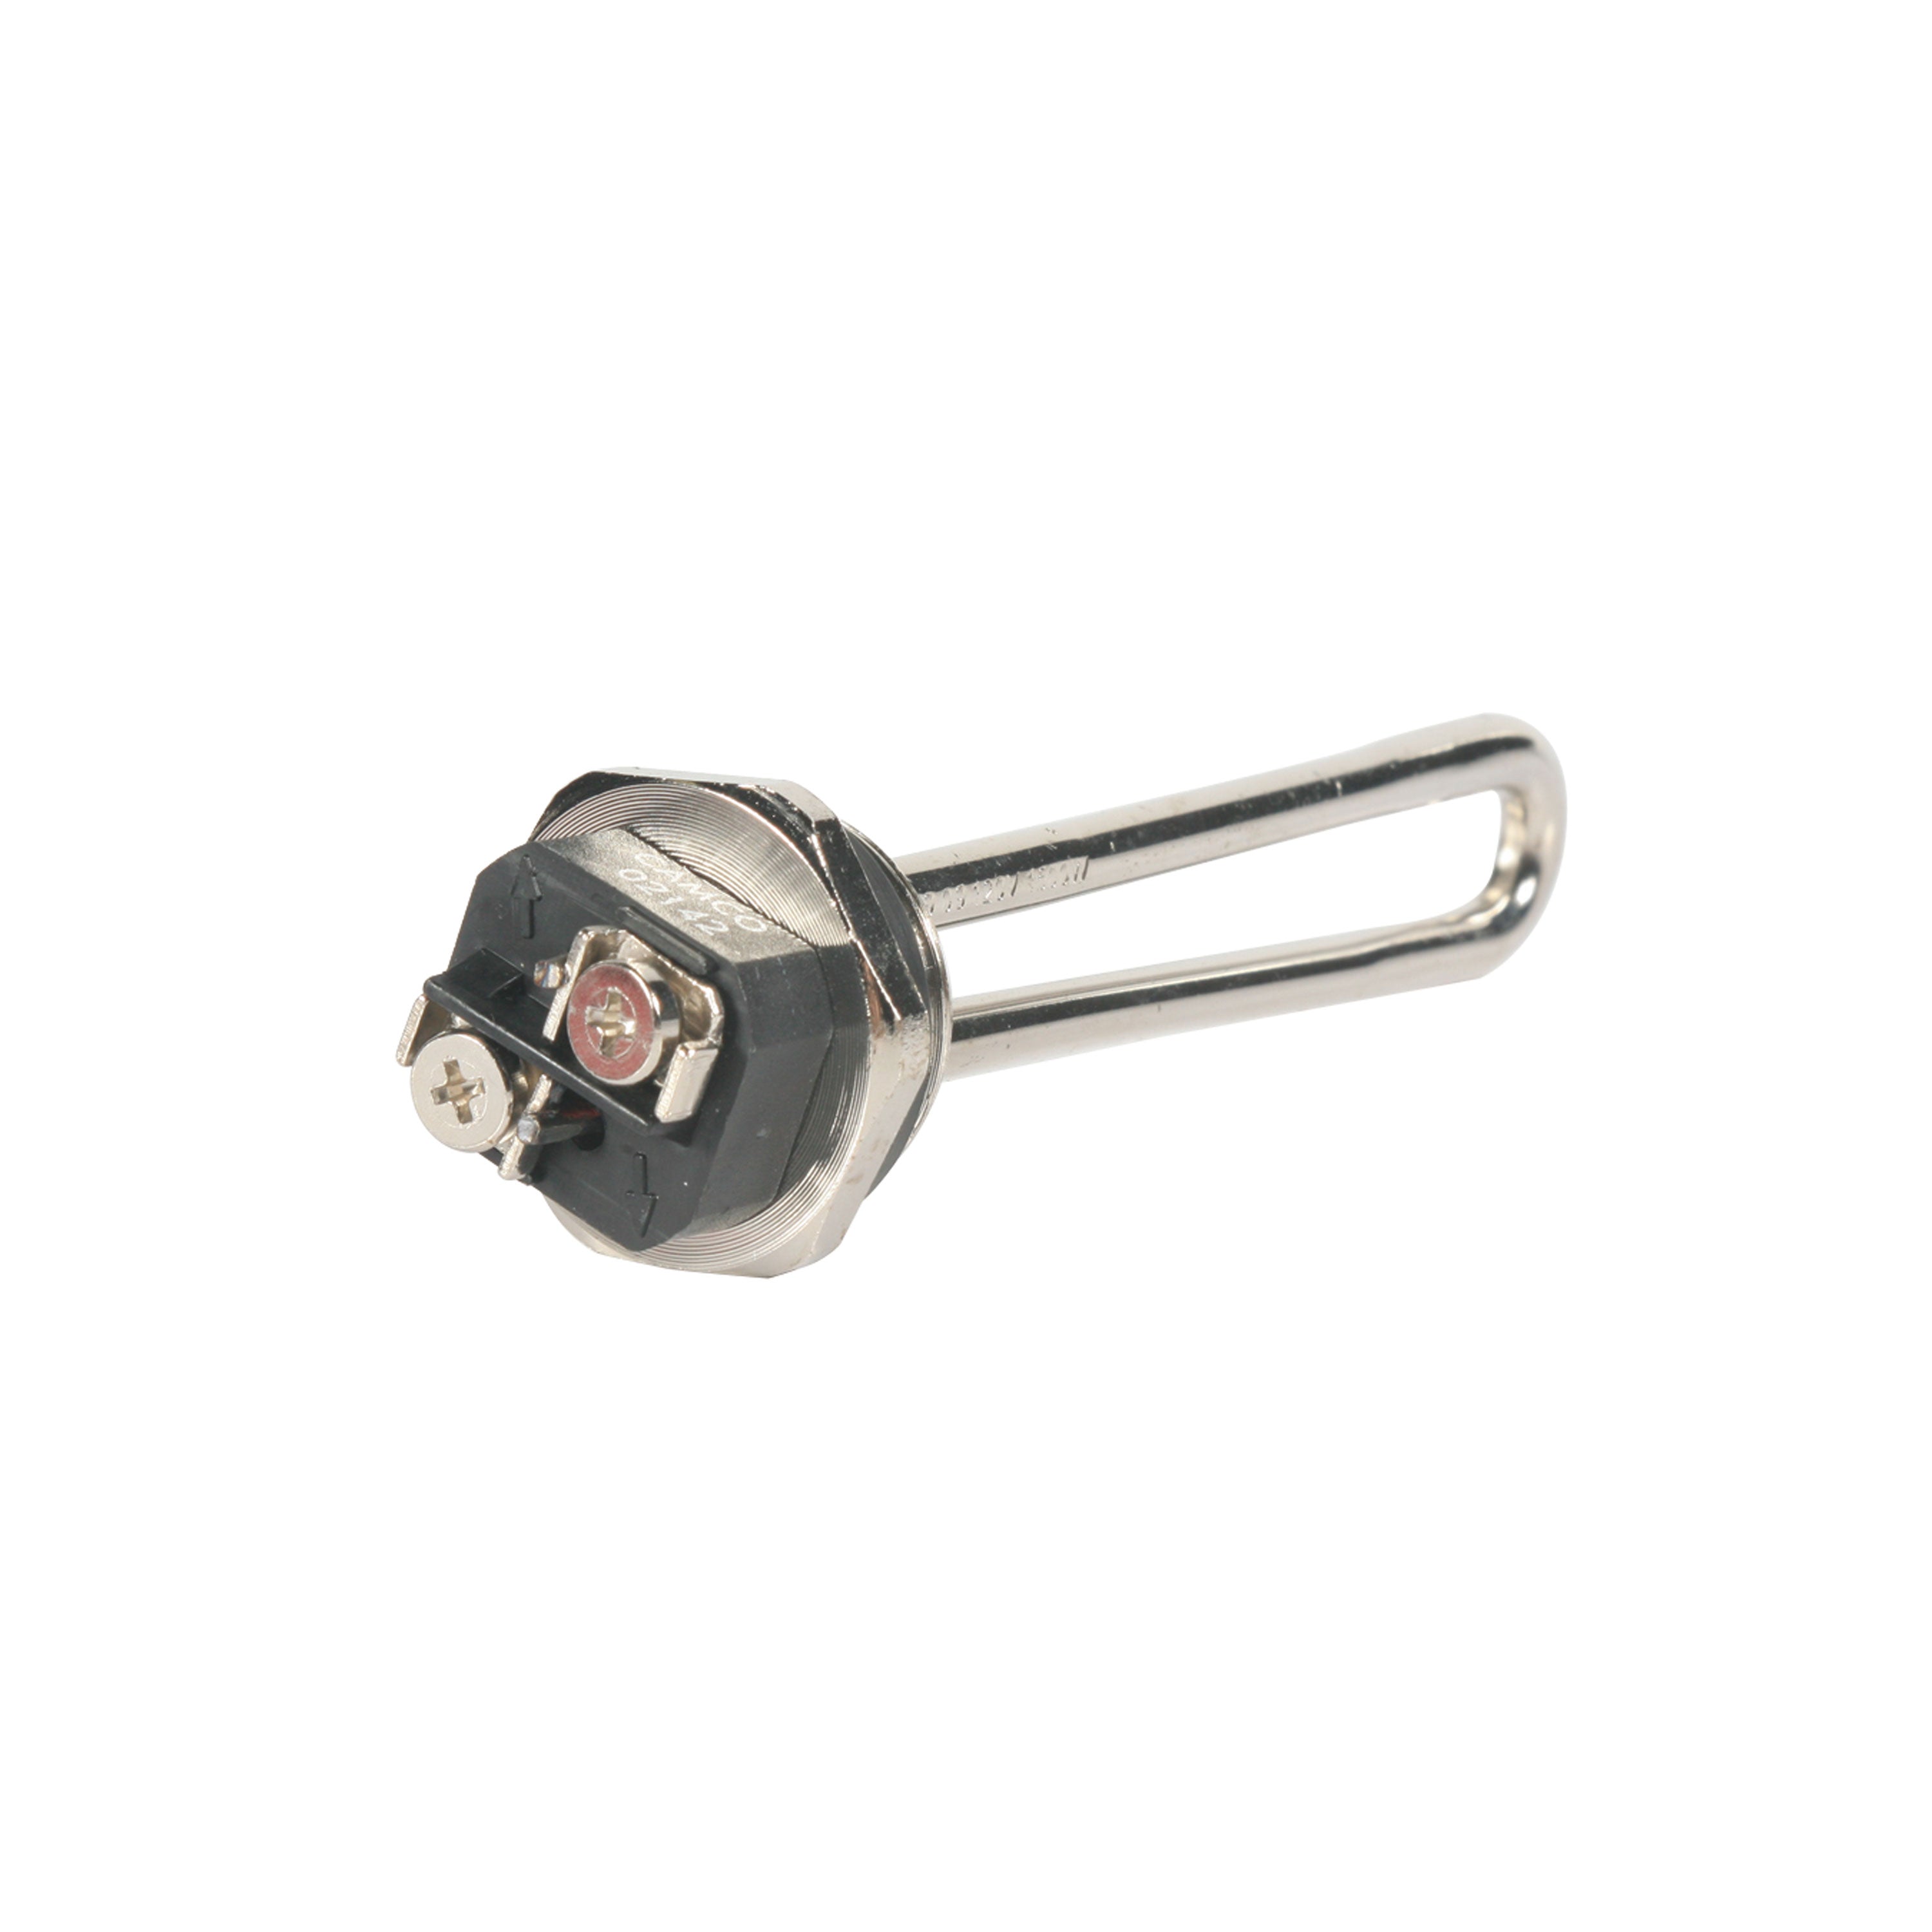 Camco 02143 Screw-In Immersion Element - 120V/1500W